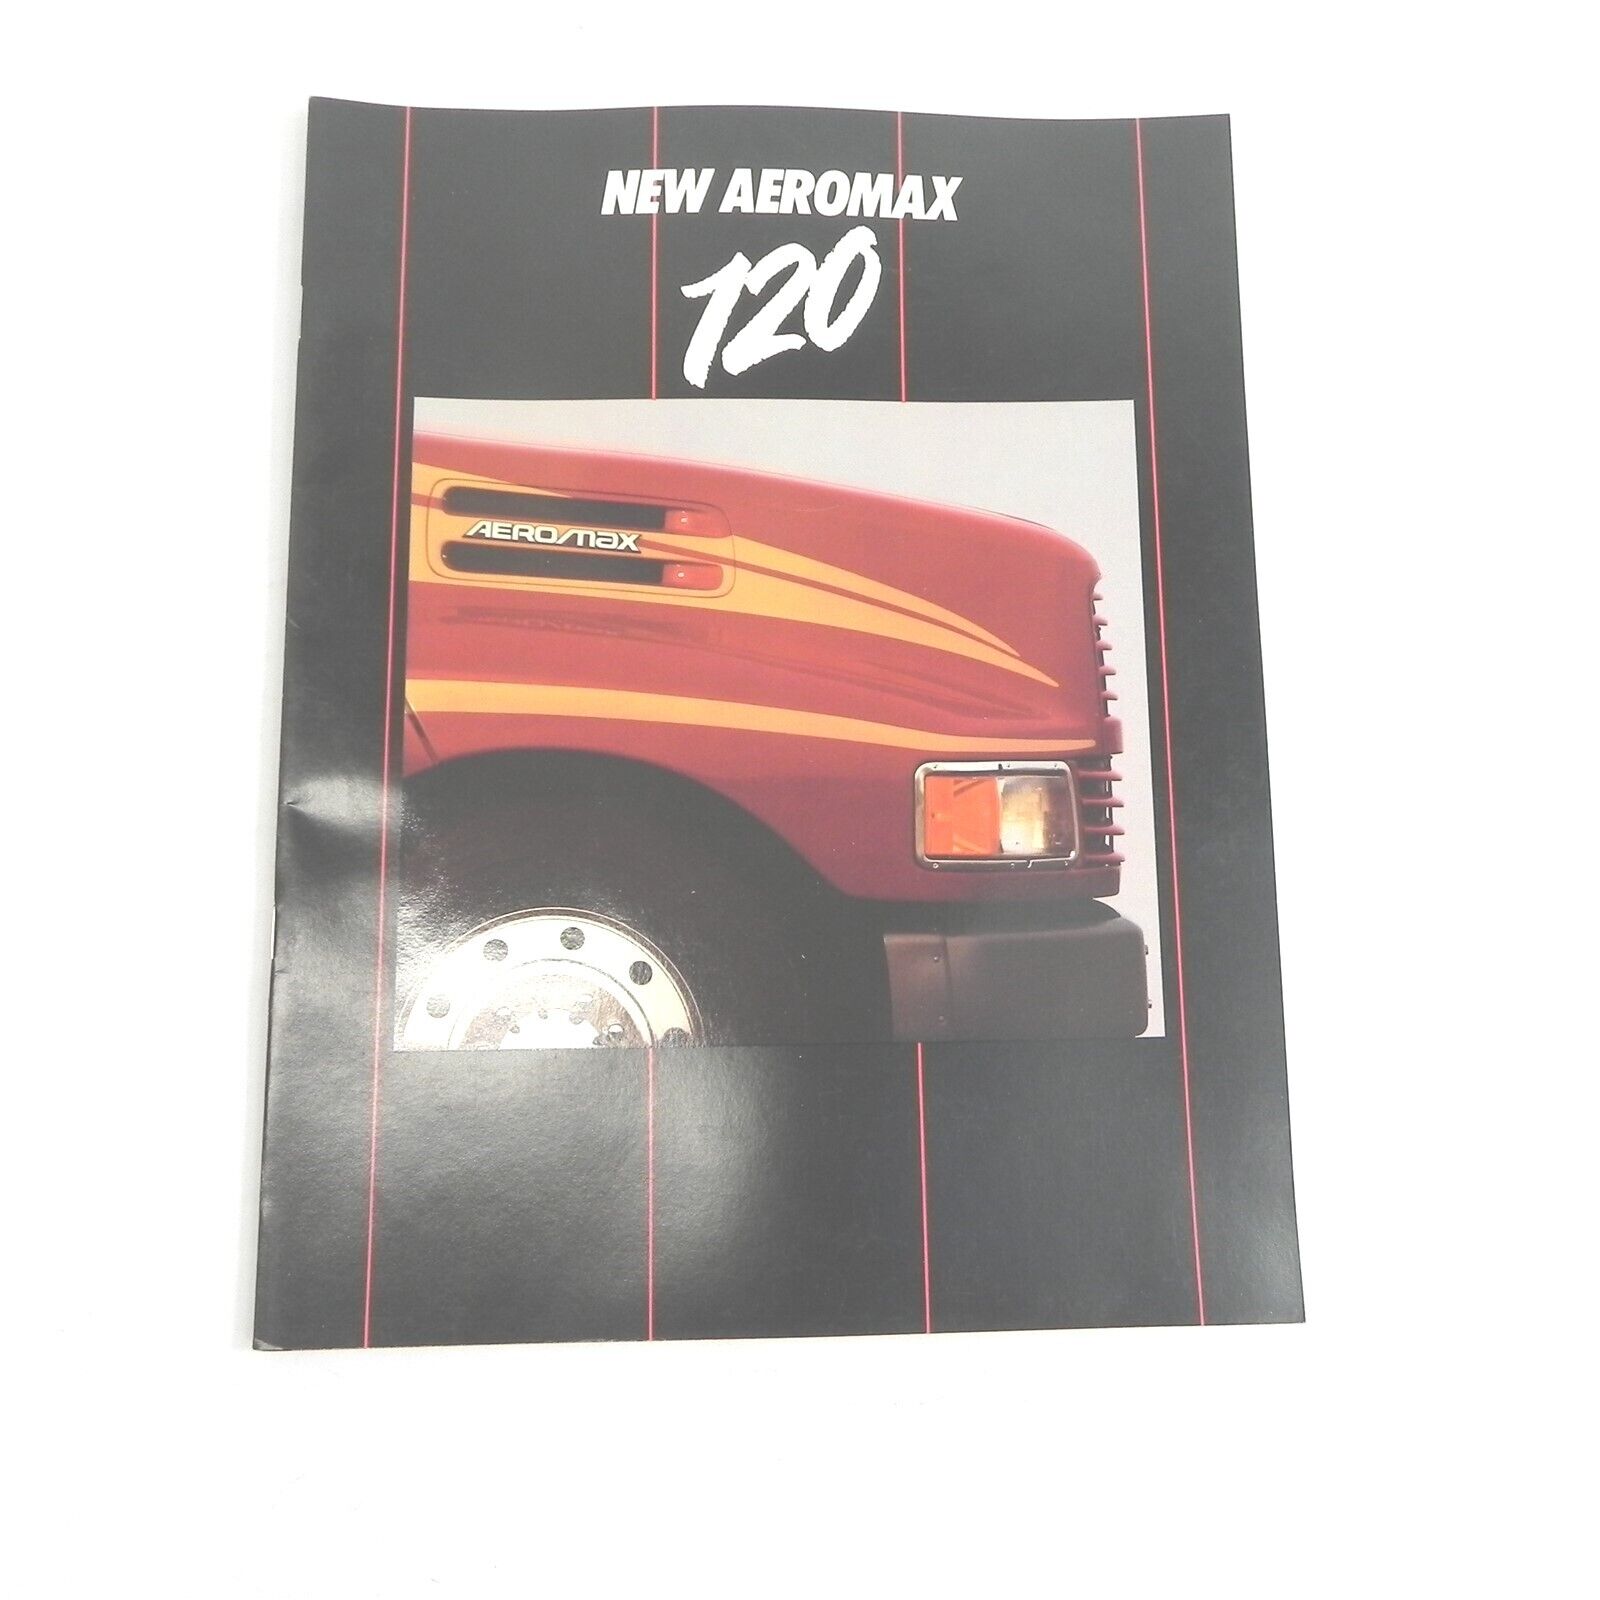 1991 FORD AEROMAX 120 DEALERSHIP SALES BROCHURE SPECIFICATIONS INFORMATION RARE